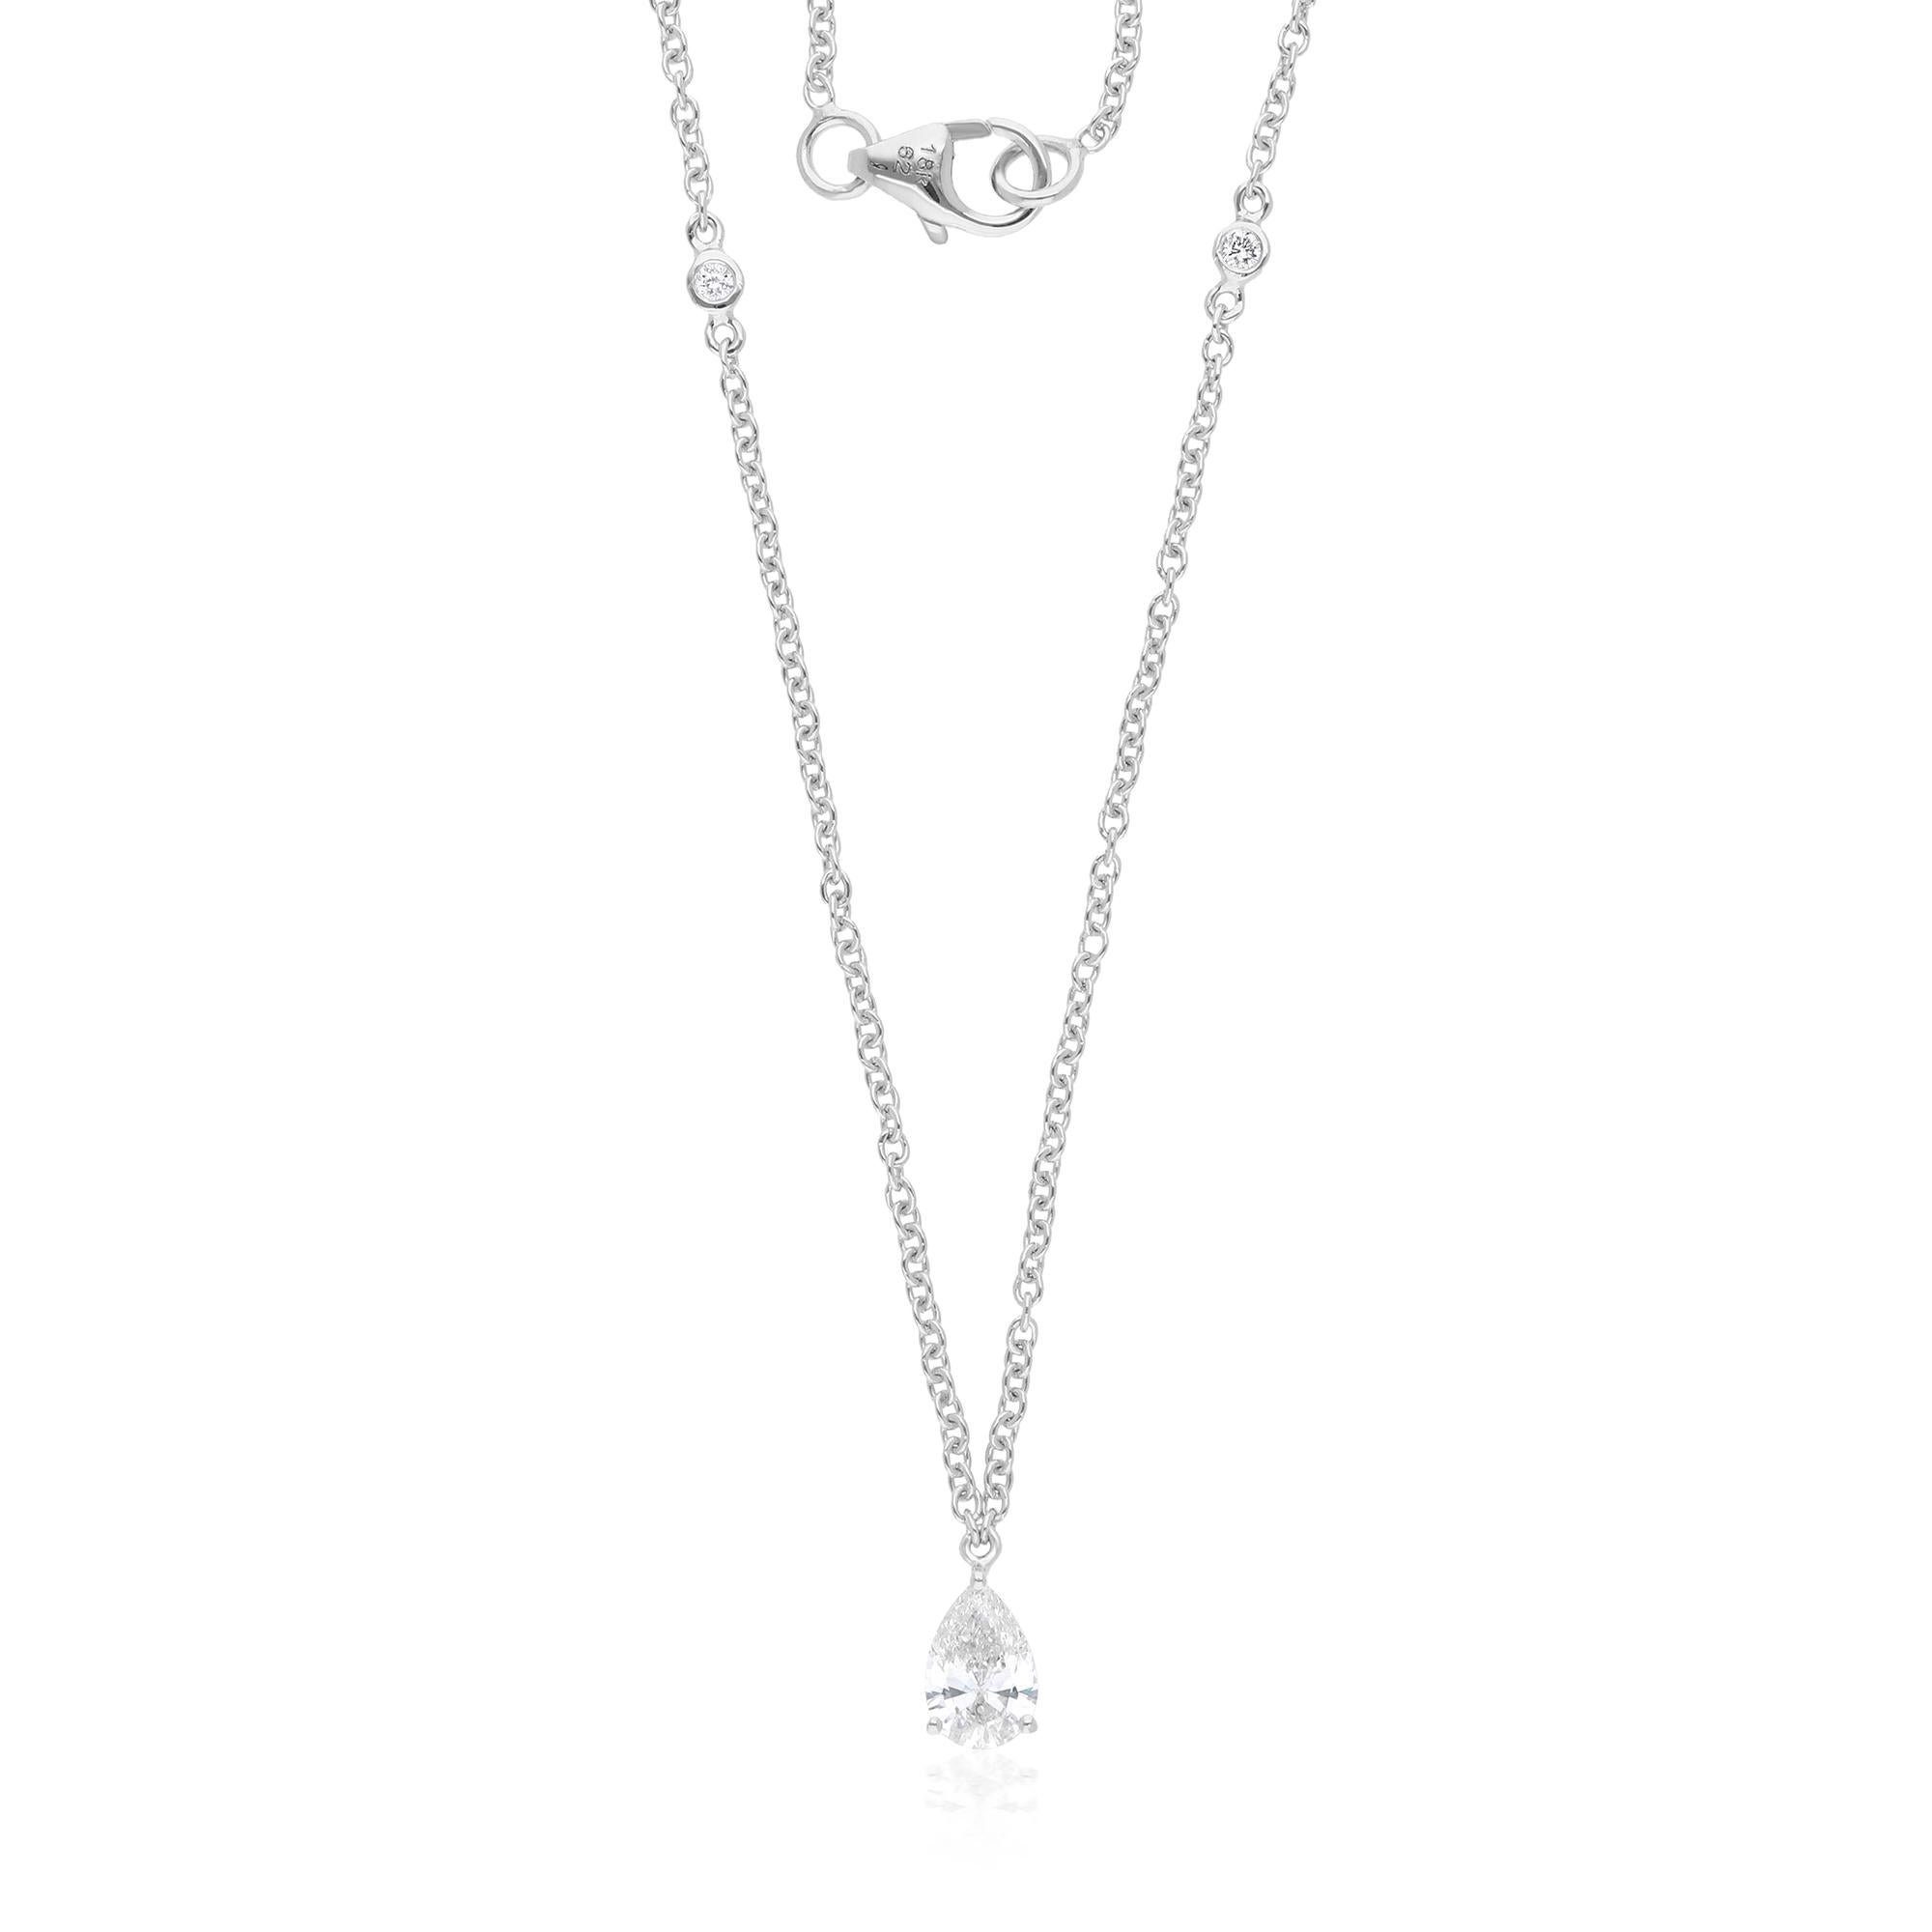 Women's Natural 0.57 Ct. Pear & Round Diamond Chain Necklace 18 Karat White Gold Jewelry For Sale